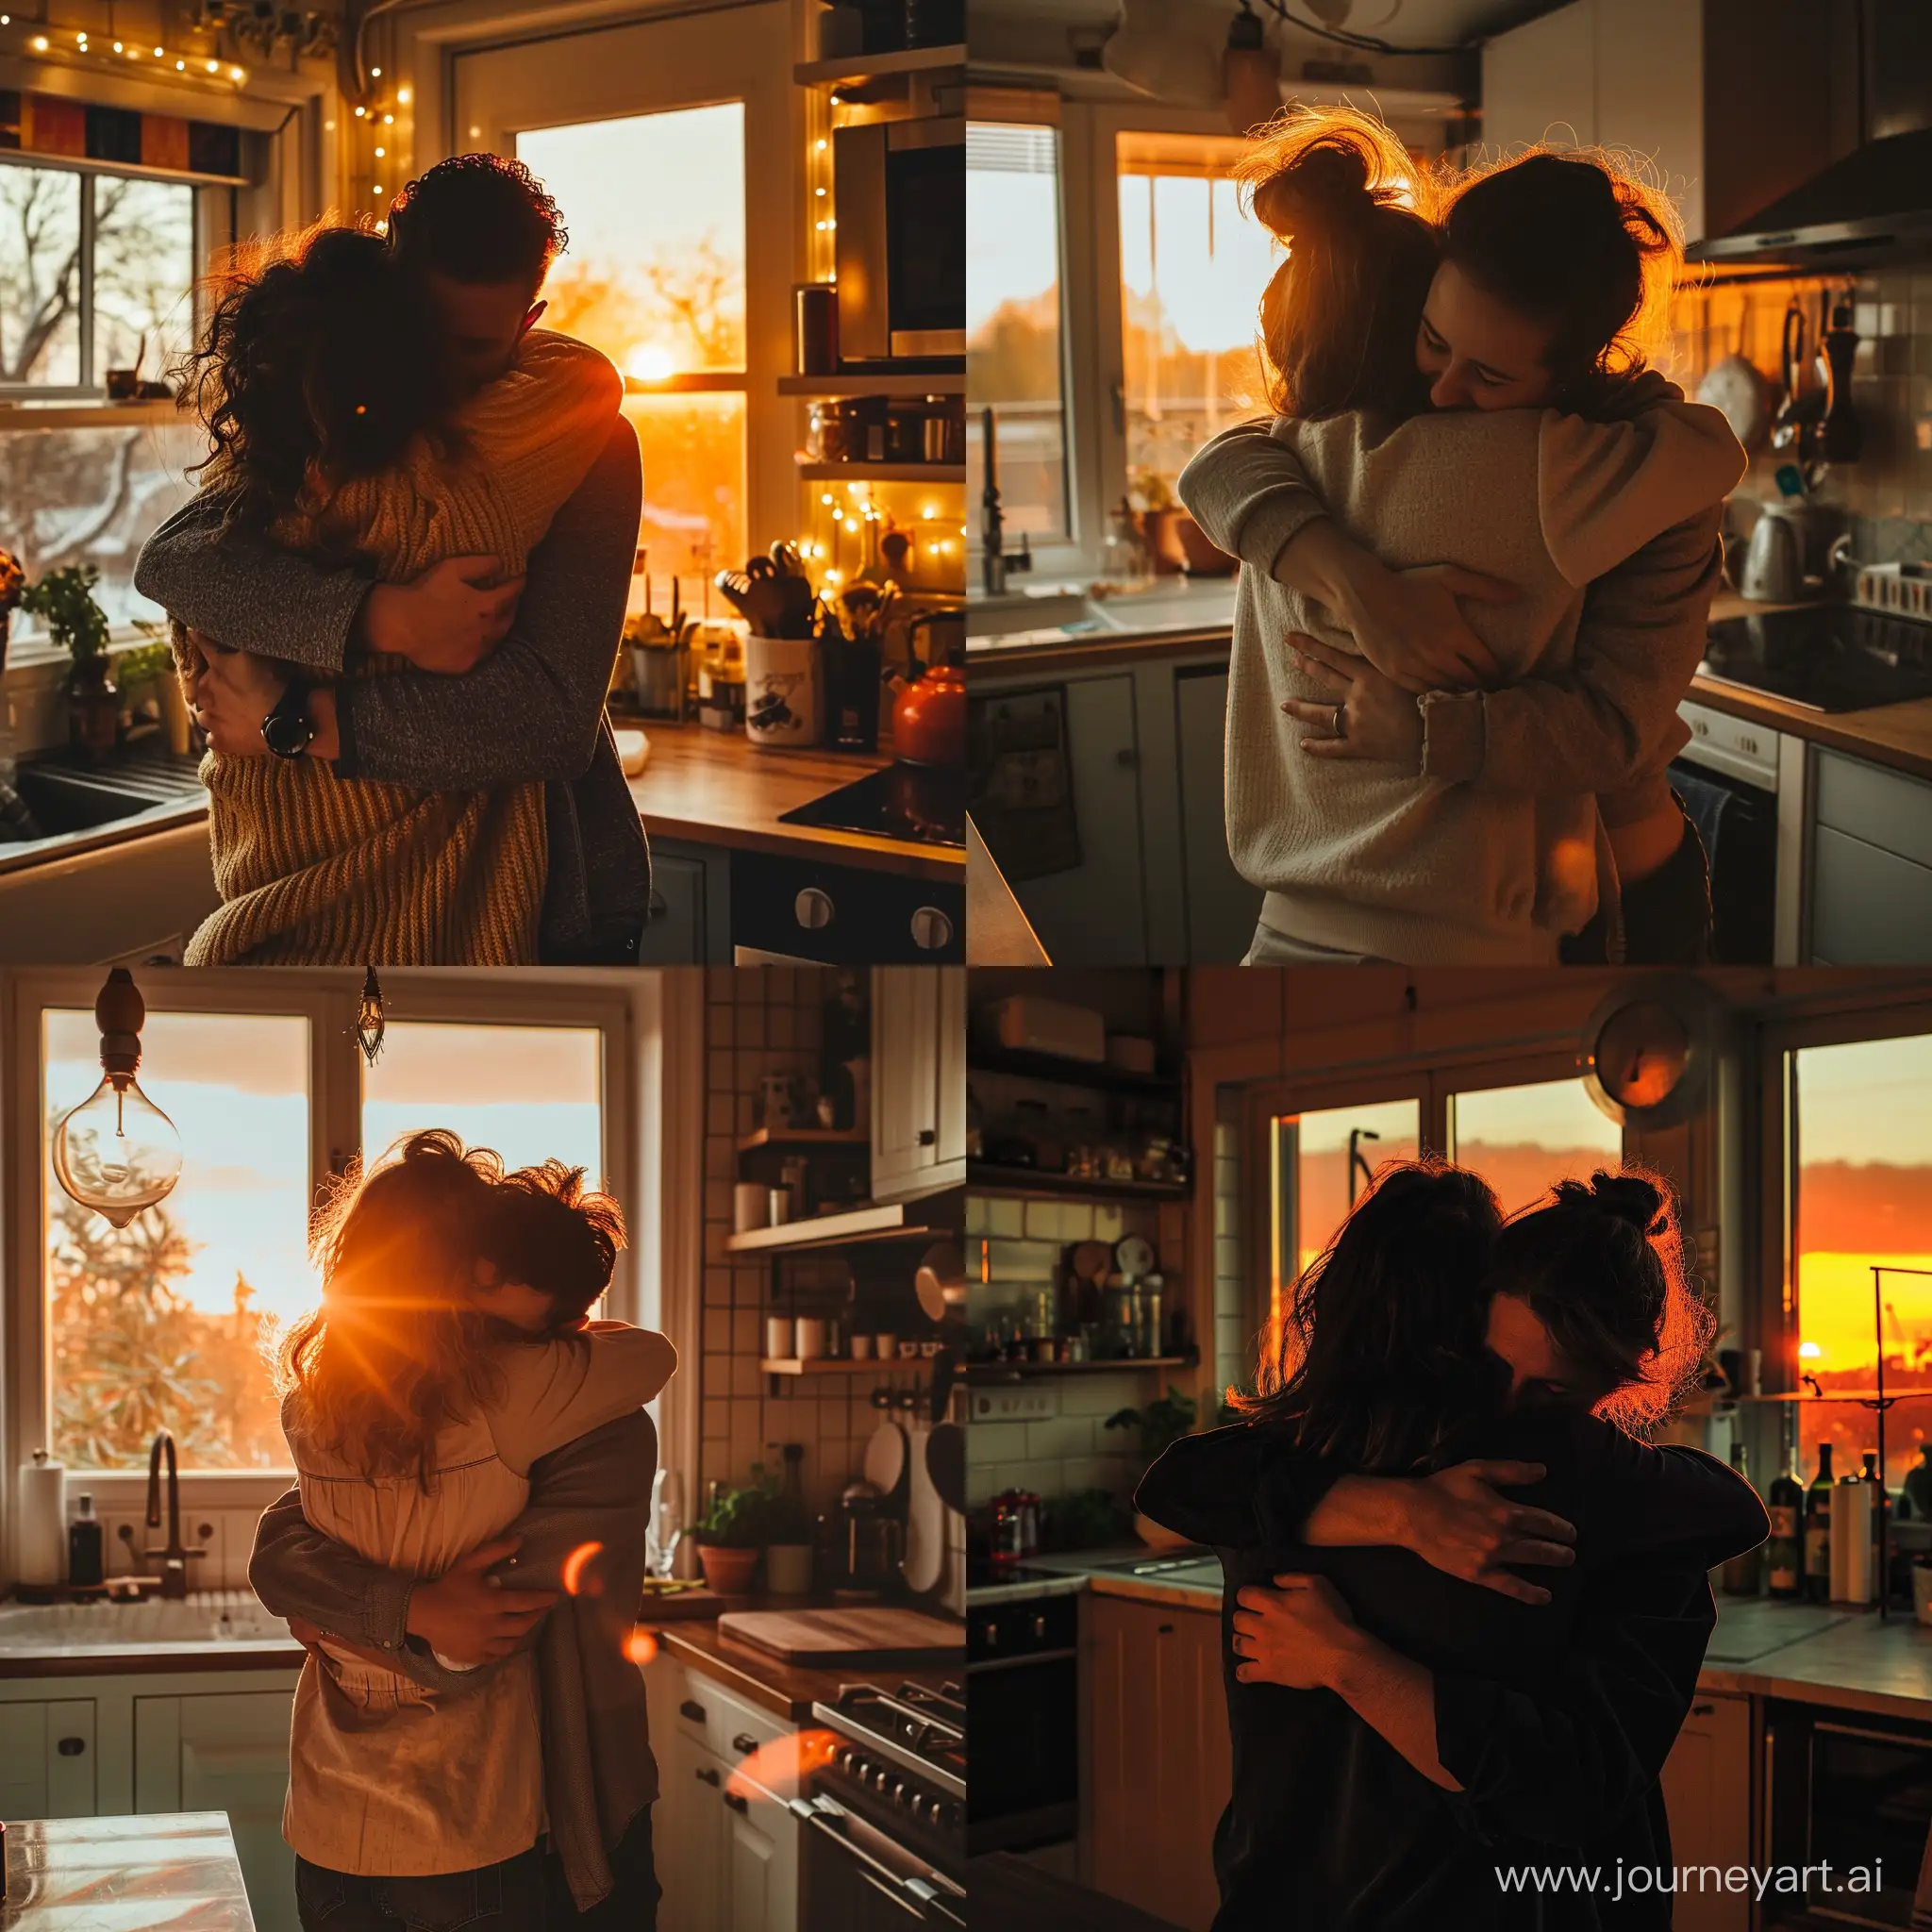  2 people hugging in the kitchen, no faces visible, sunset lighting, romantic, dreamy, cozy kitchen